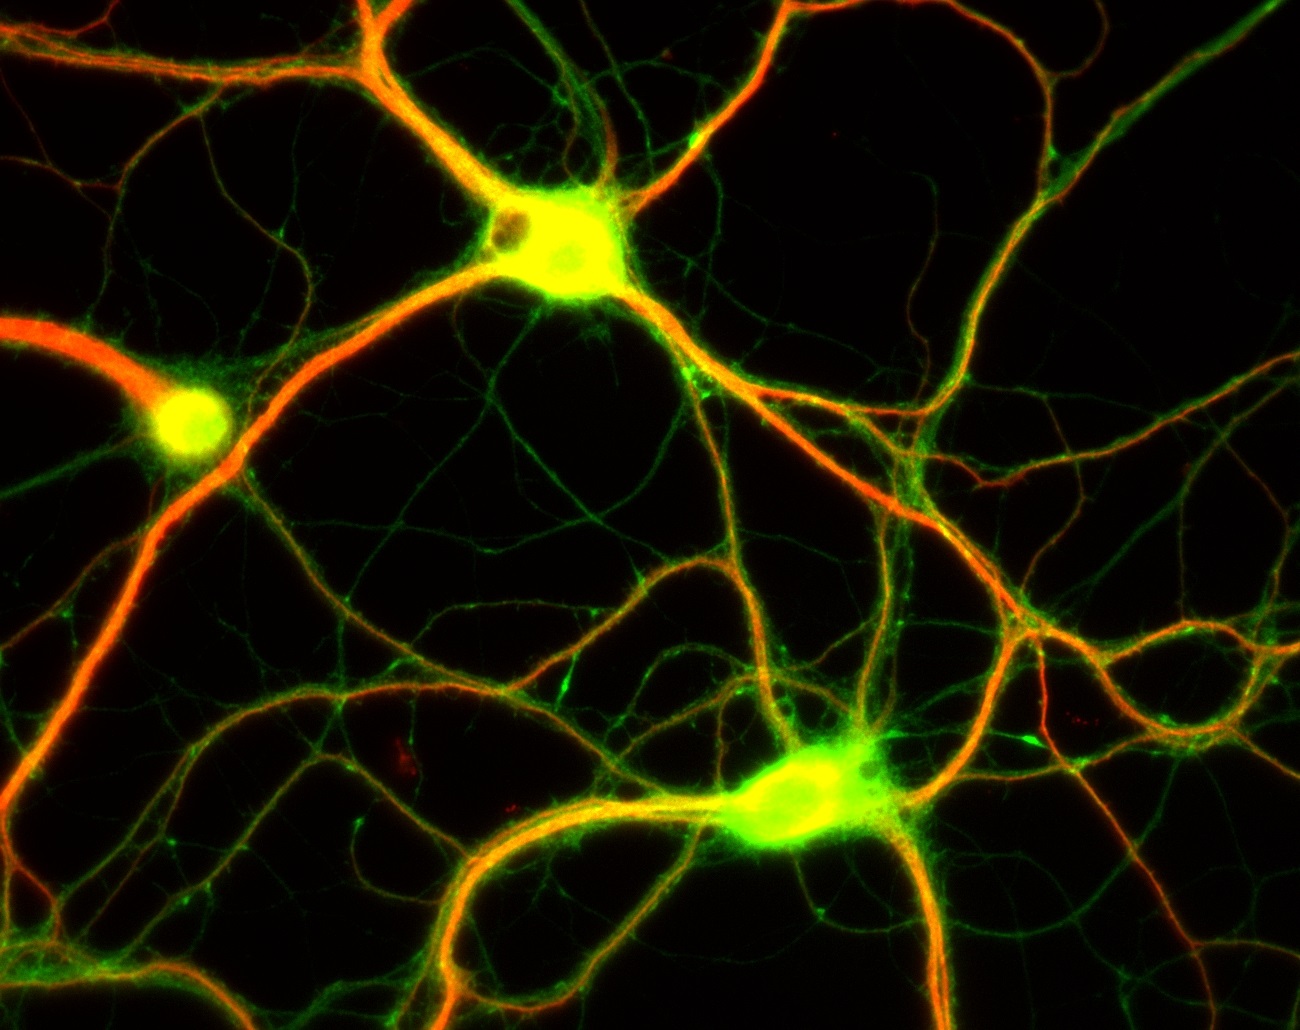 Neurons connect and “talk” to each other by sending chemical messengers called neurotransmitters. While you might text to connect to your friends, neurons pass their messages through synapses, which are tiny gaps between neurons. It’s not uncommon for one neuron to have a thousand synapses. Altogether there are about 100 trillion synapses in the brain—about the same as the number of cells in your body! ("Photo via Dieter Brandner; Ginger Withers)